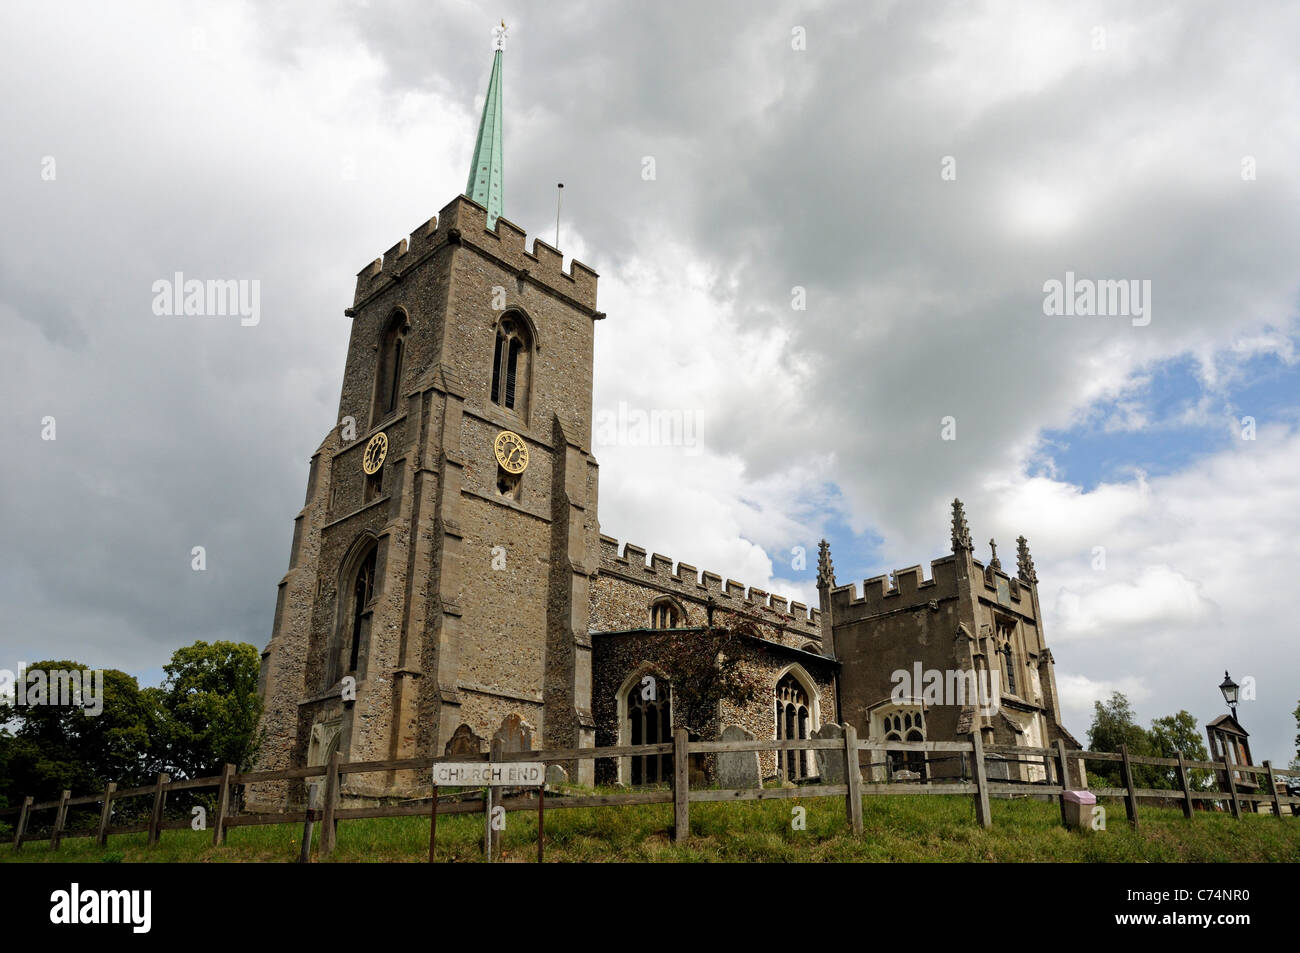 St Marys Church Village Braughing Hertfordshire England UK Banque D'Images